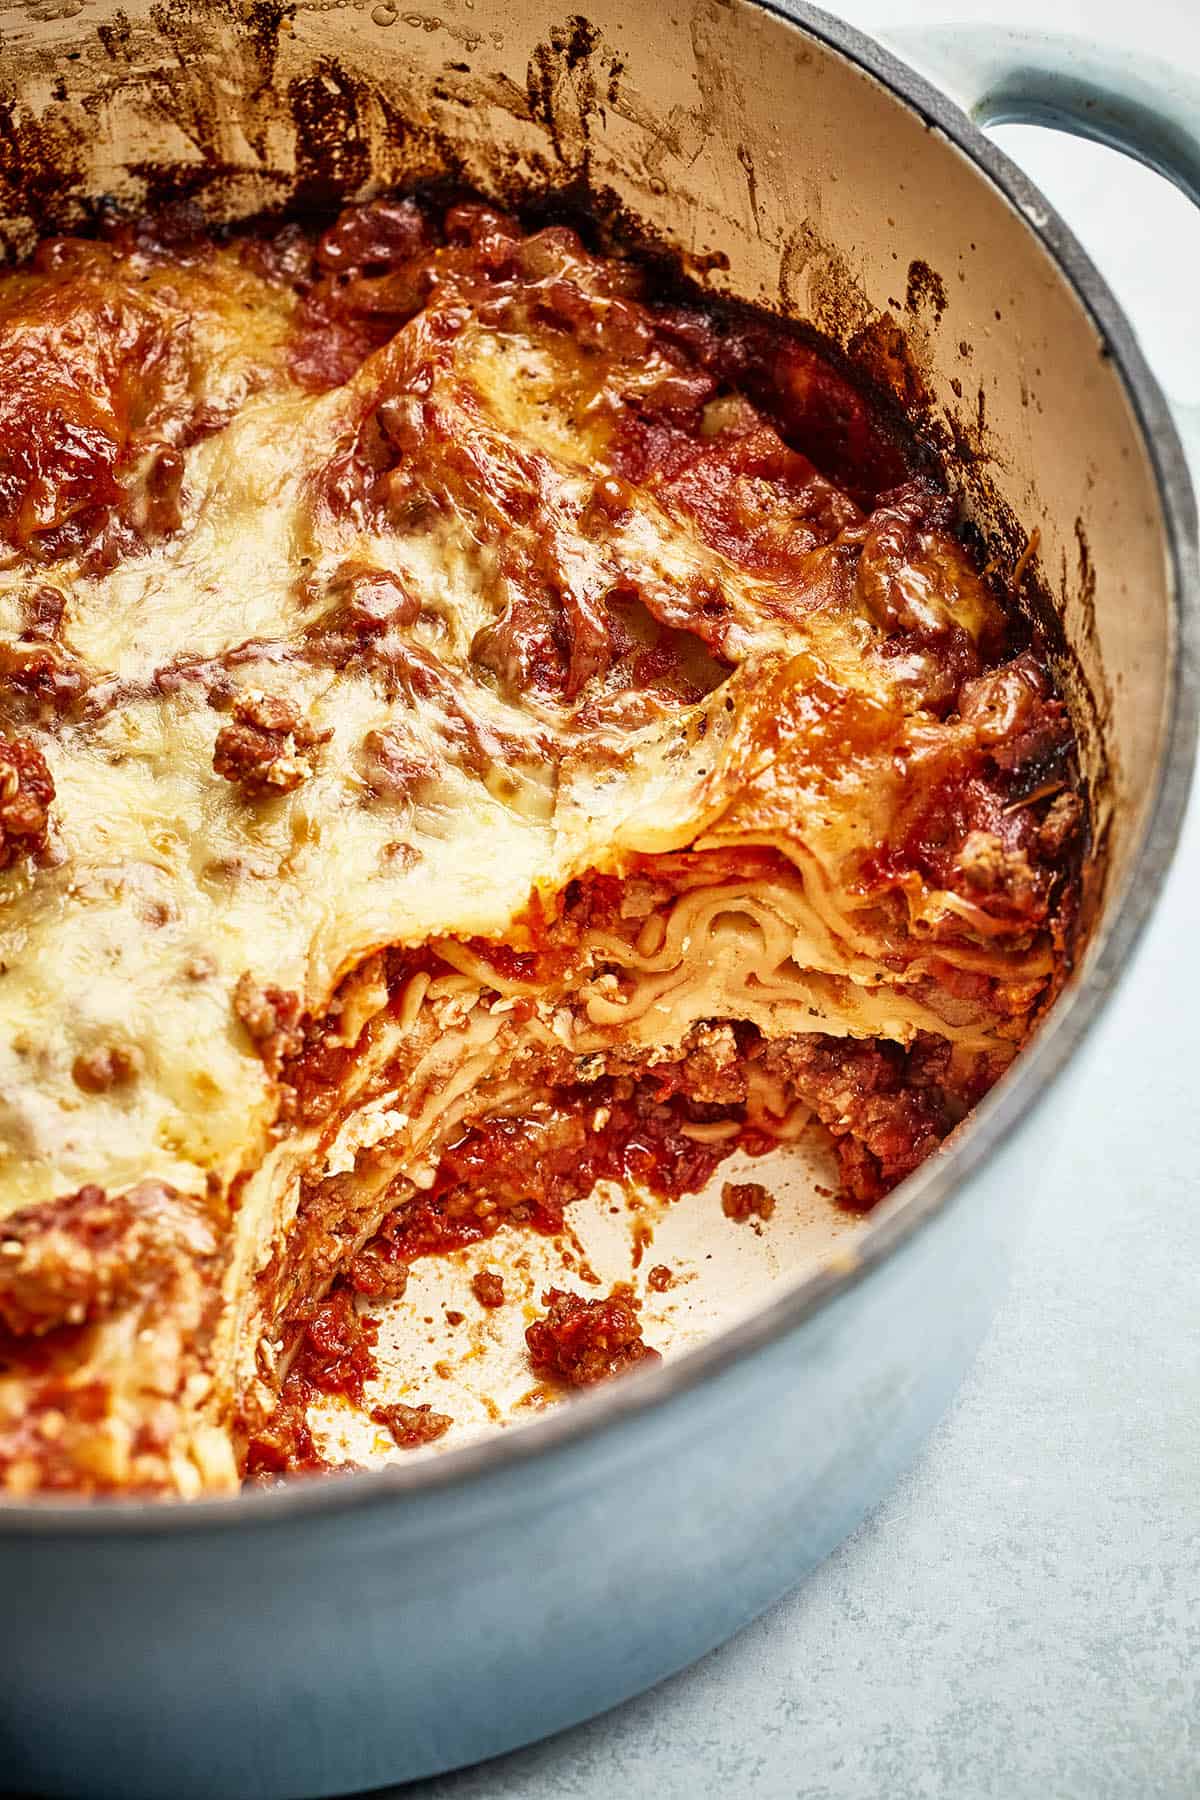 Savory lasagna in a pan layered with ground sausage, topped with melted cheese.